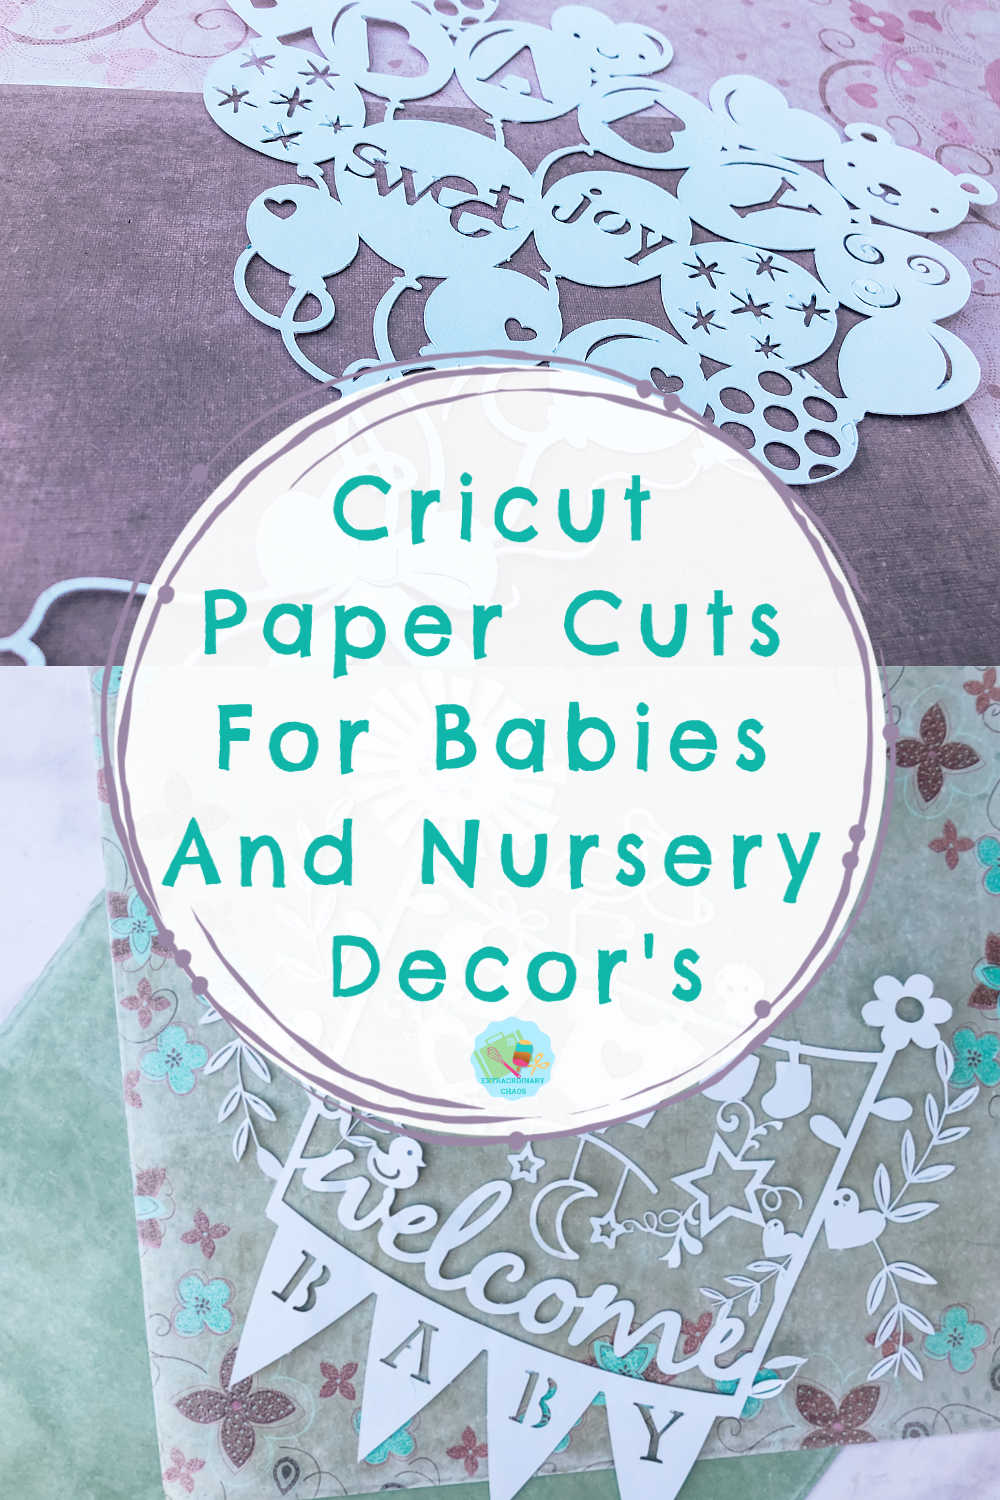 Cricut paper cuts for new baby gifts and nurseries to sell.